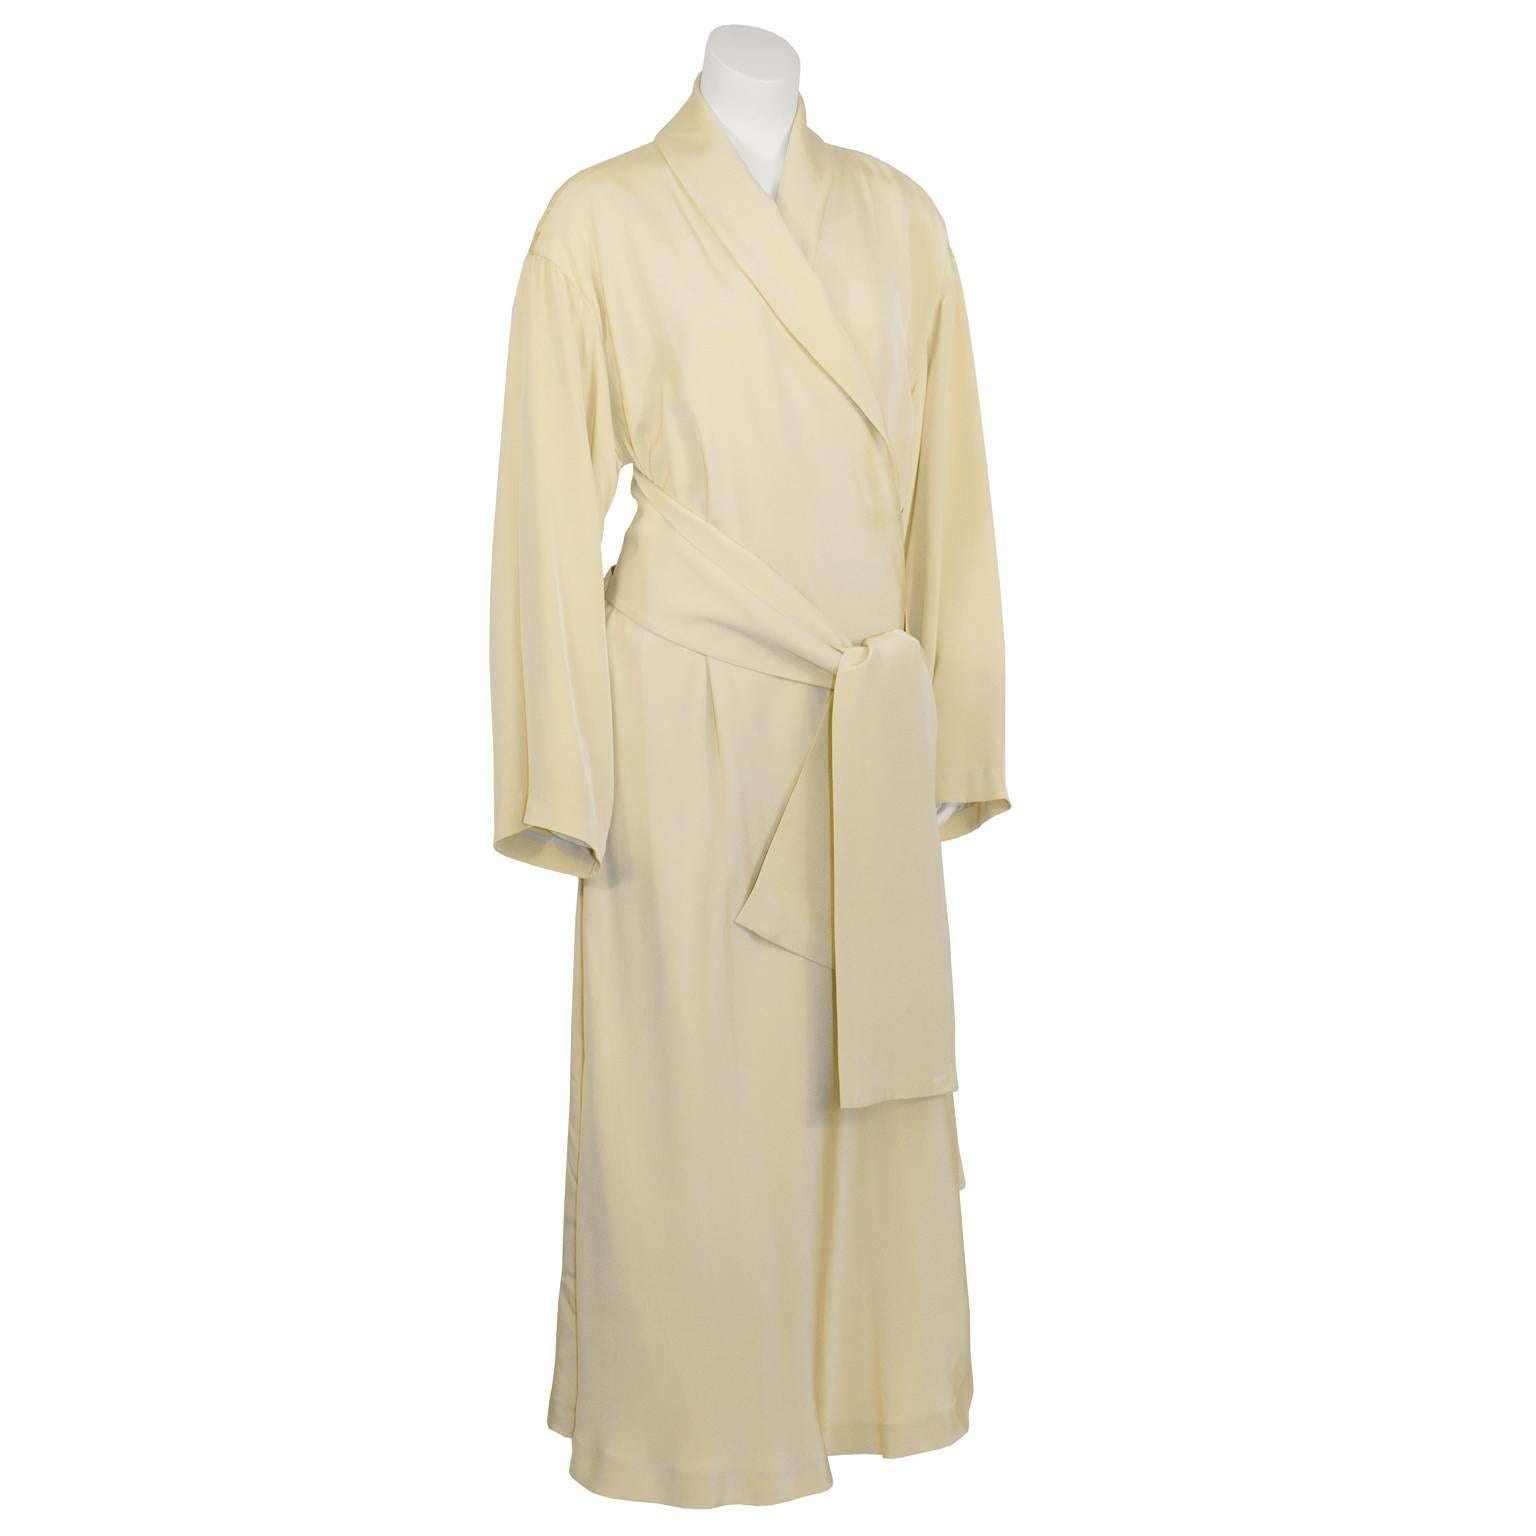 Elegant and unique vintage Issey Miyake cream silk robe style dress from the 1980's featuring a shawl neck, slightly gathered shouldered, loose sleeves, and an asymmetrical hem. Extra wide attached belt can be tied in multiple fashions. Excellent